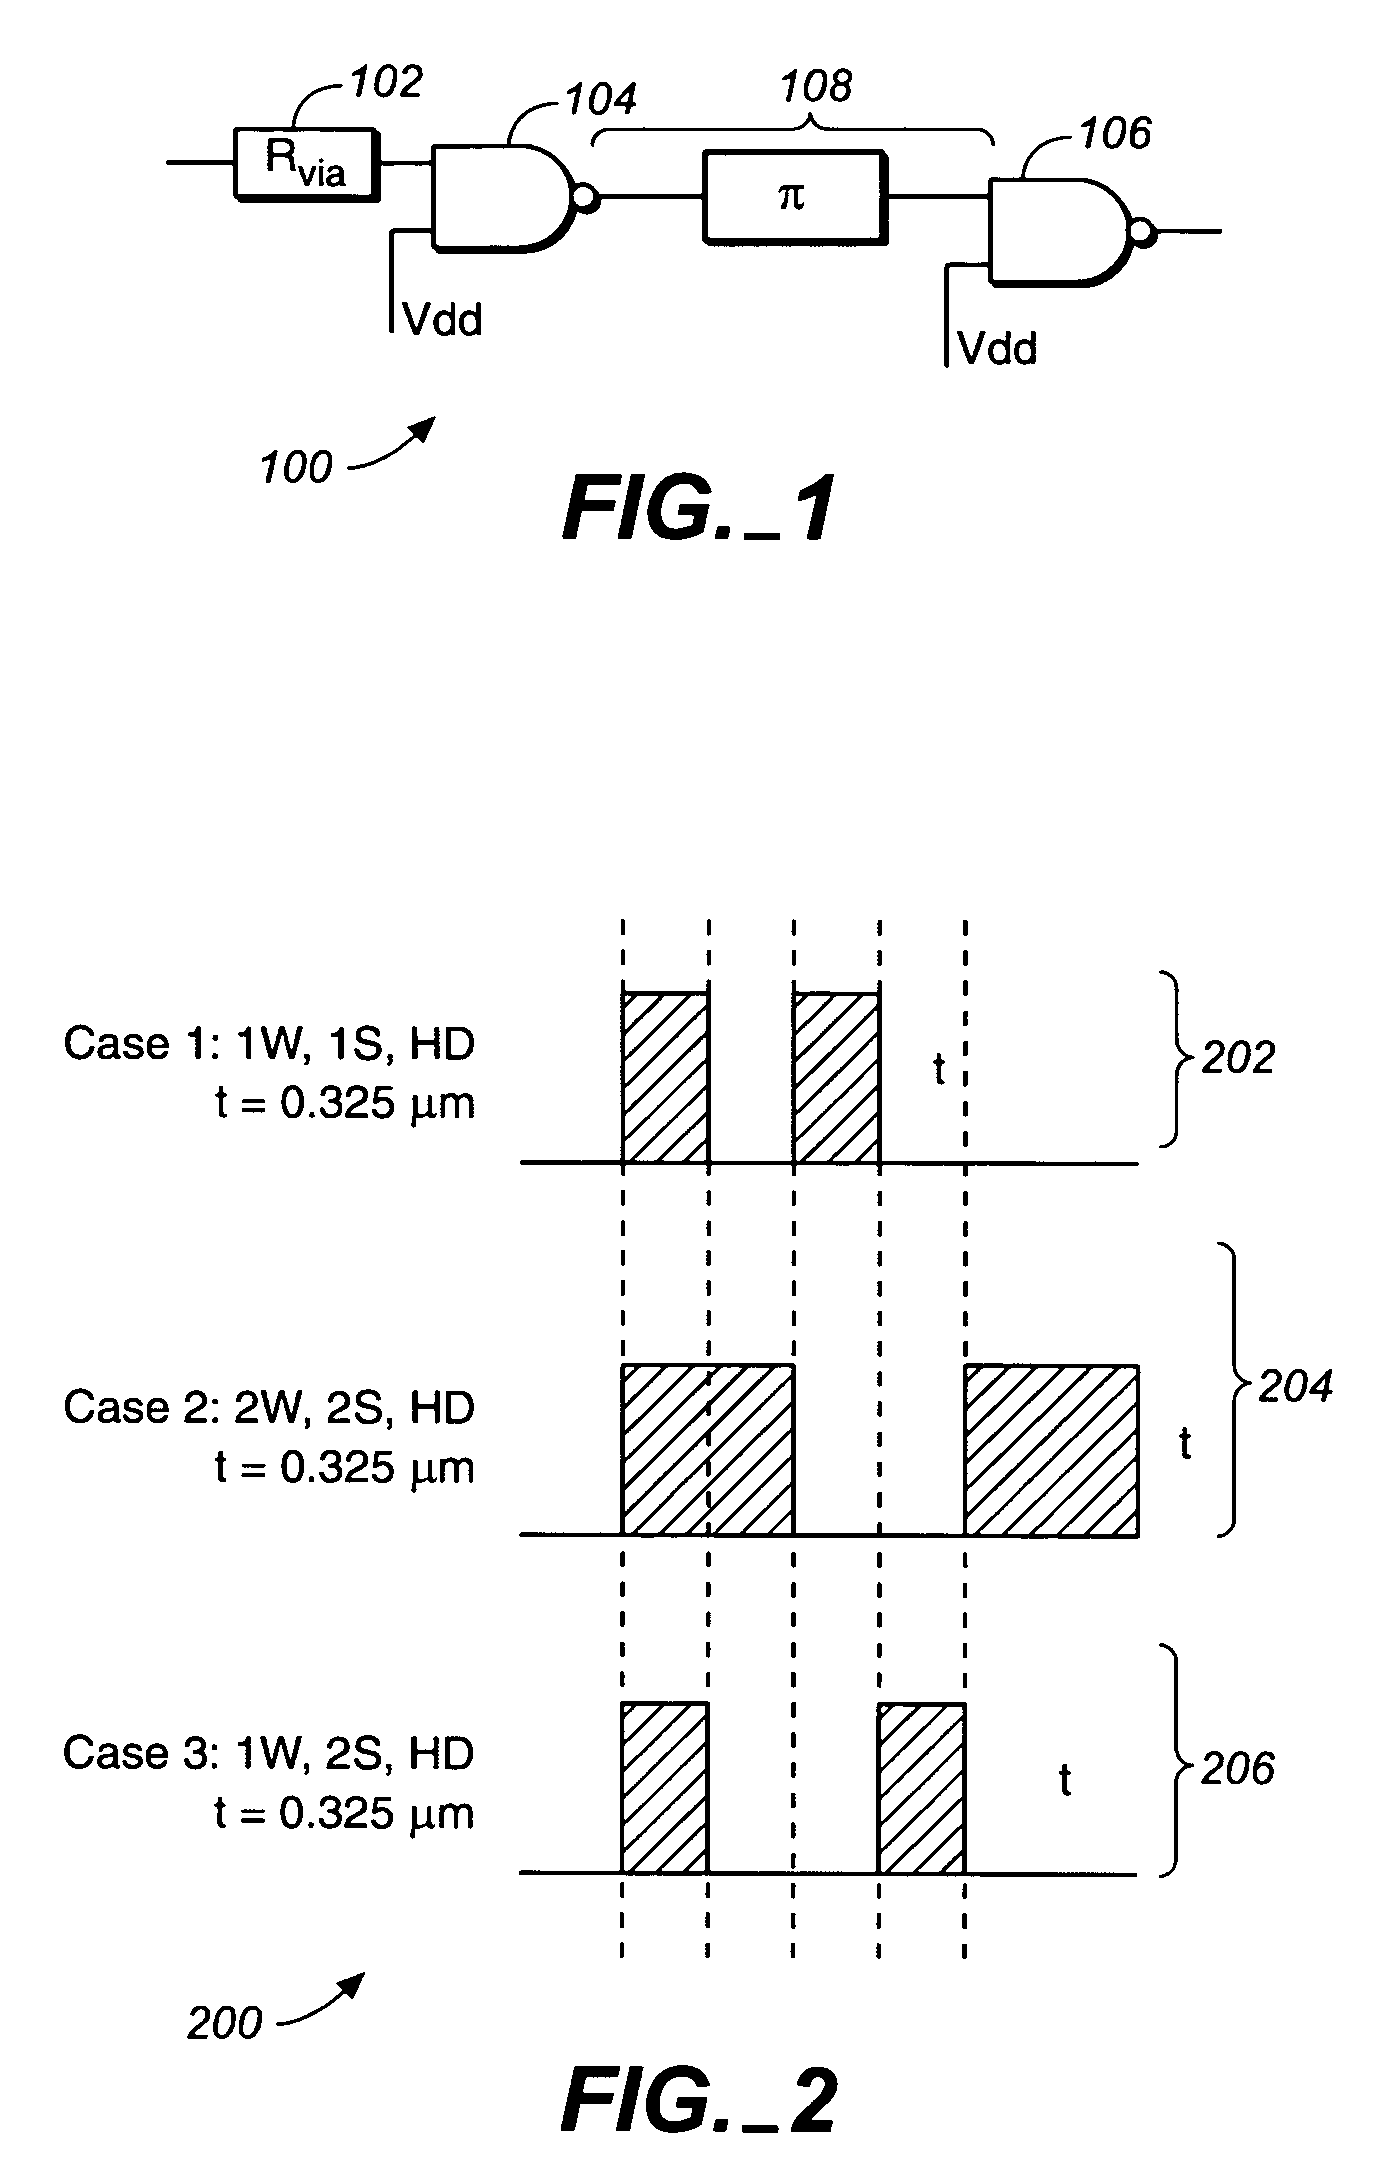 Method of optimizing critical path delay in an integrated circuit design